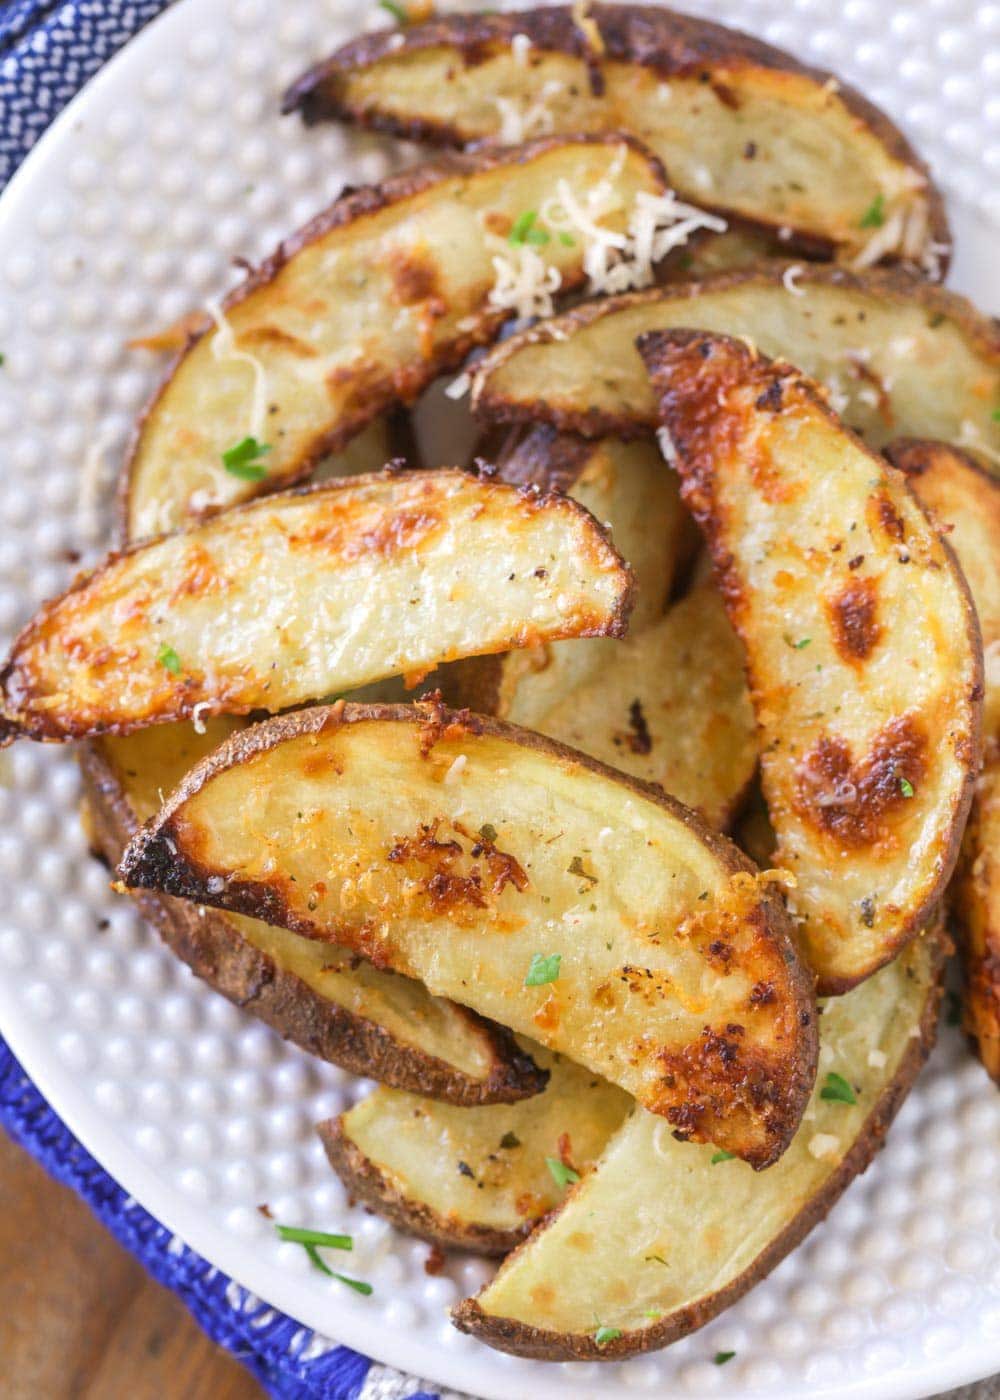 Oven baked potato wedges on a white plate